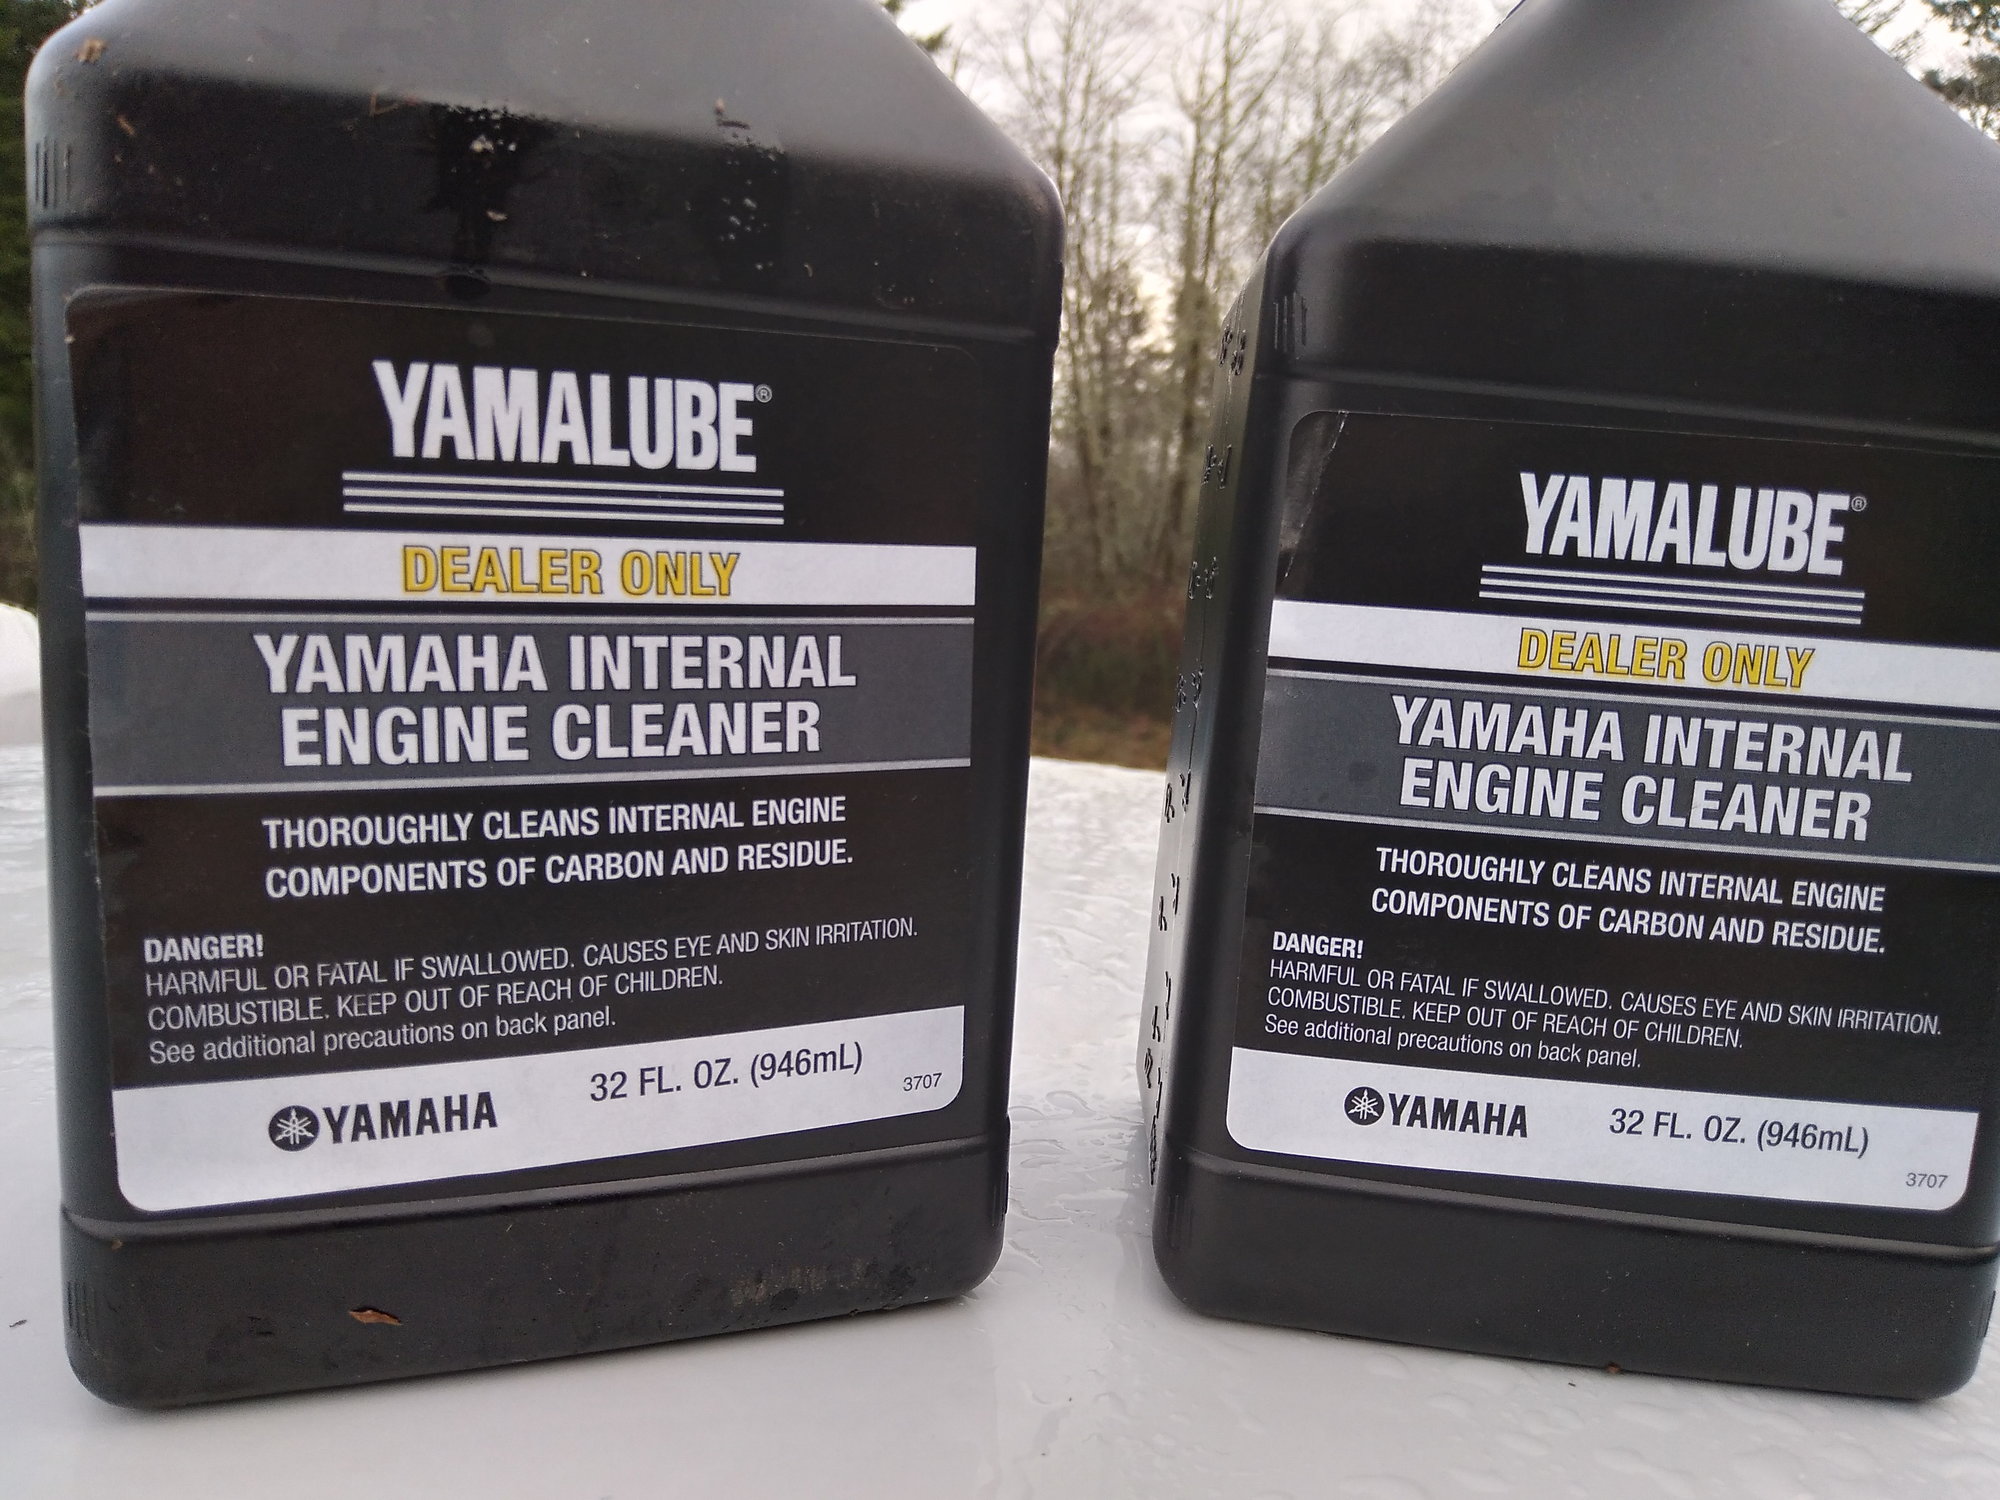 Secret Yamaha Sauce, internal engine cleaner - The Hull Truth - Boating and  Fishing Forum